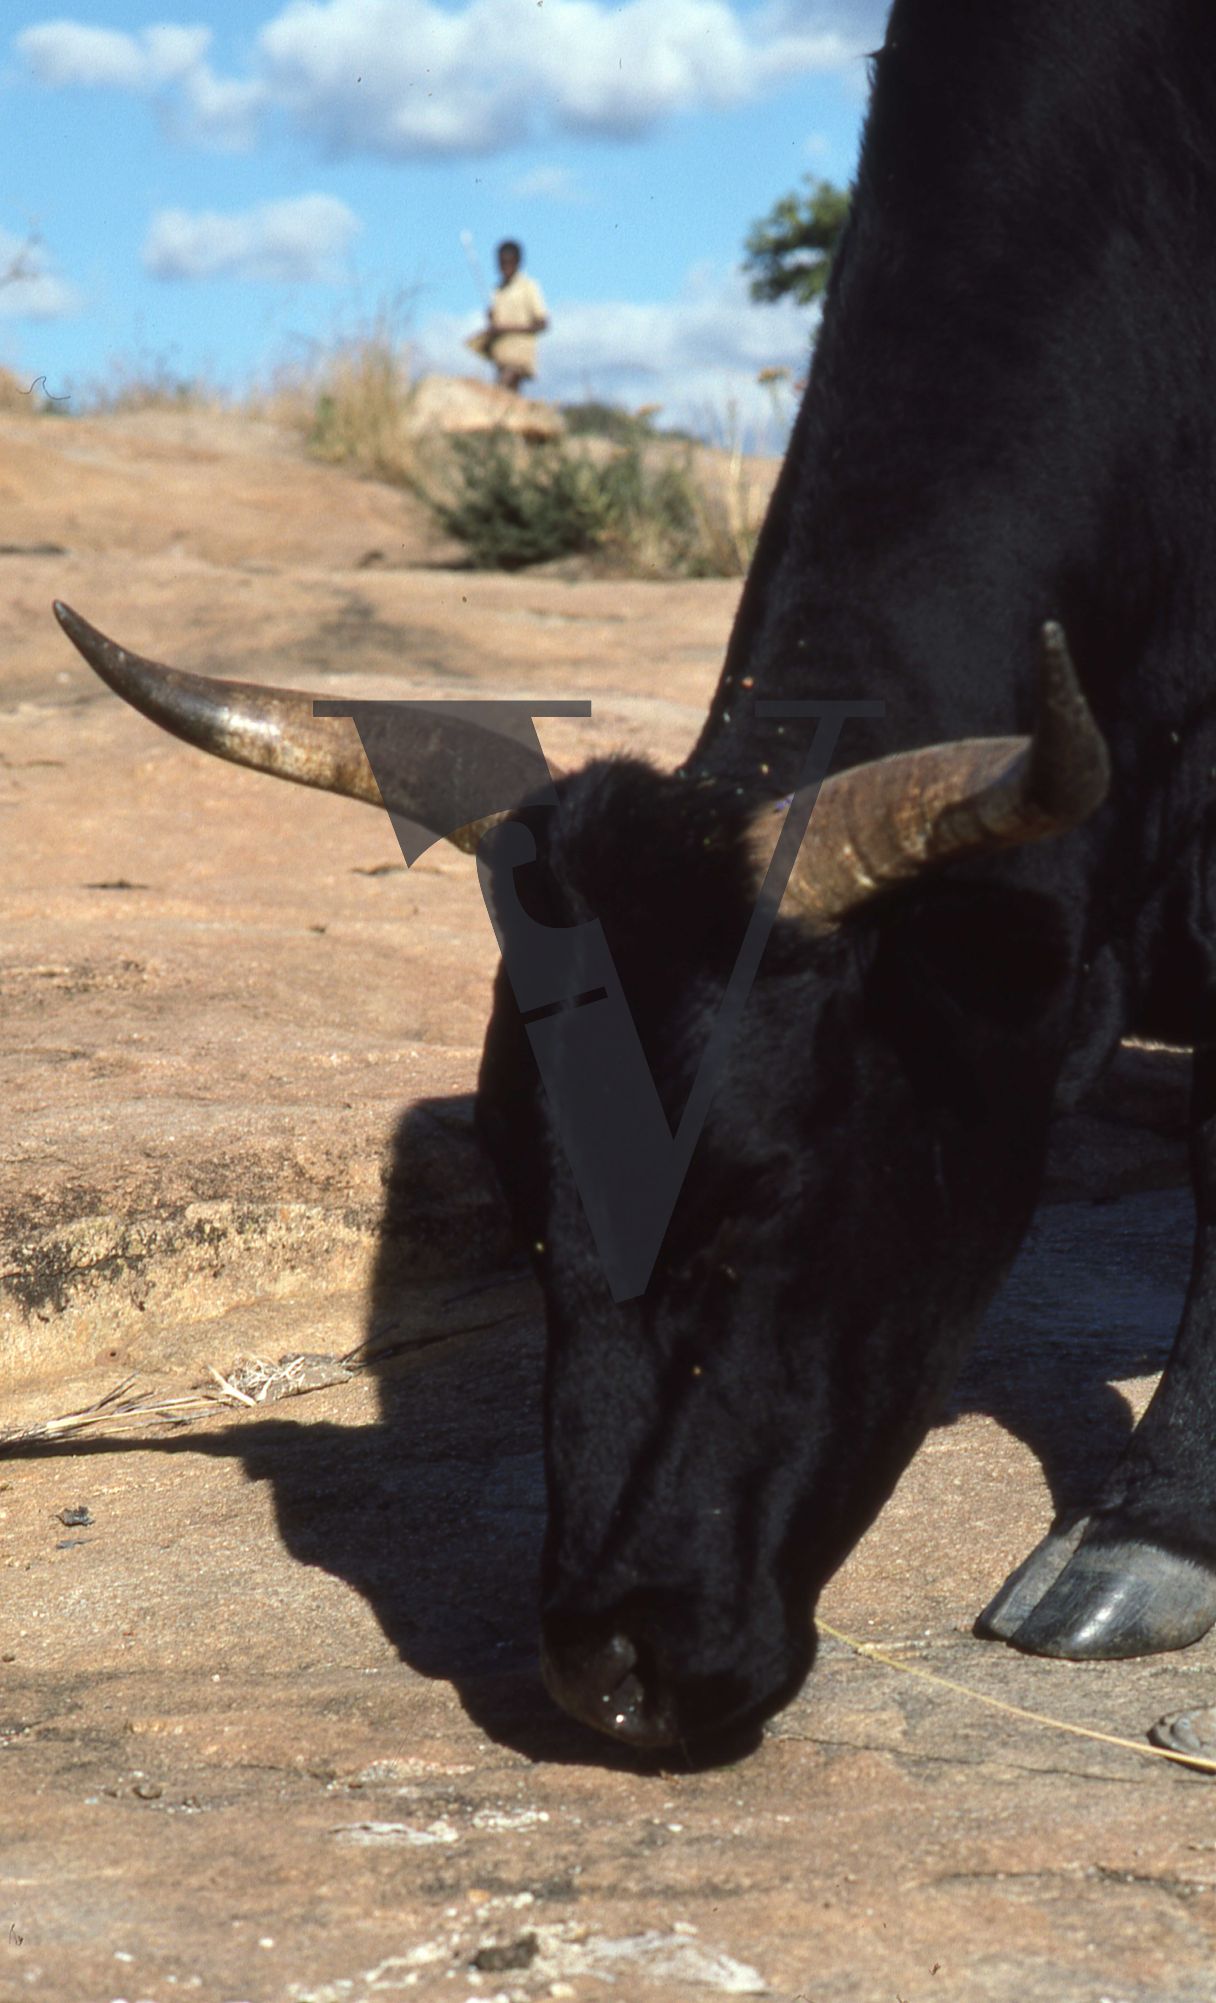 Rhodesia, cow in foreground, boy in background.